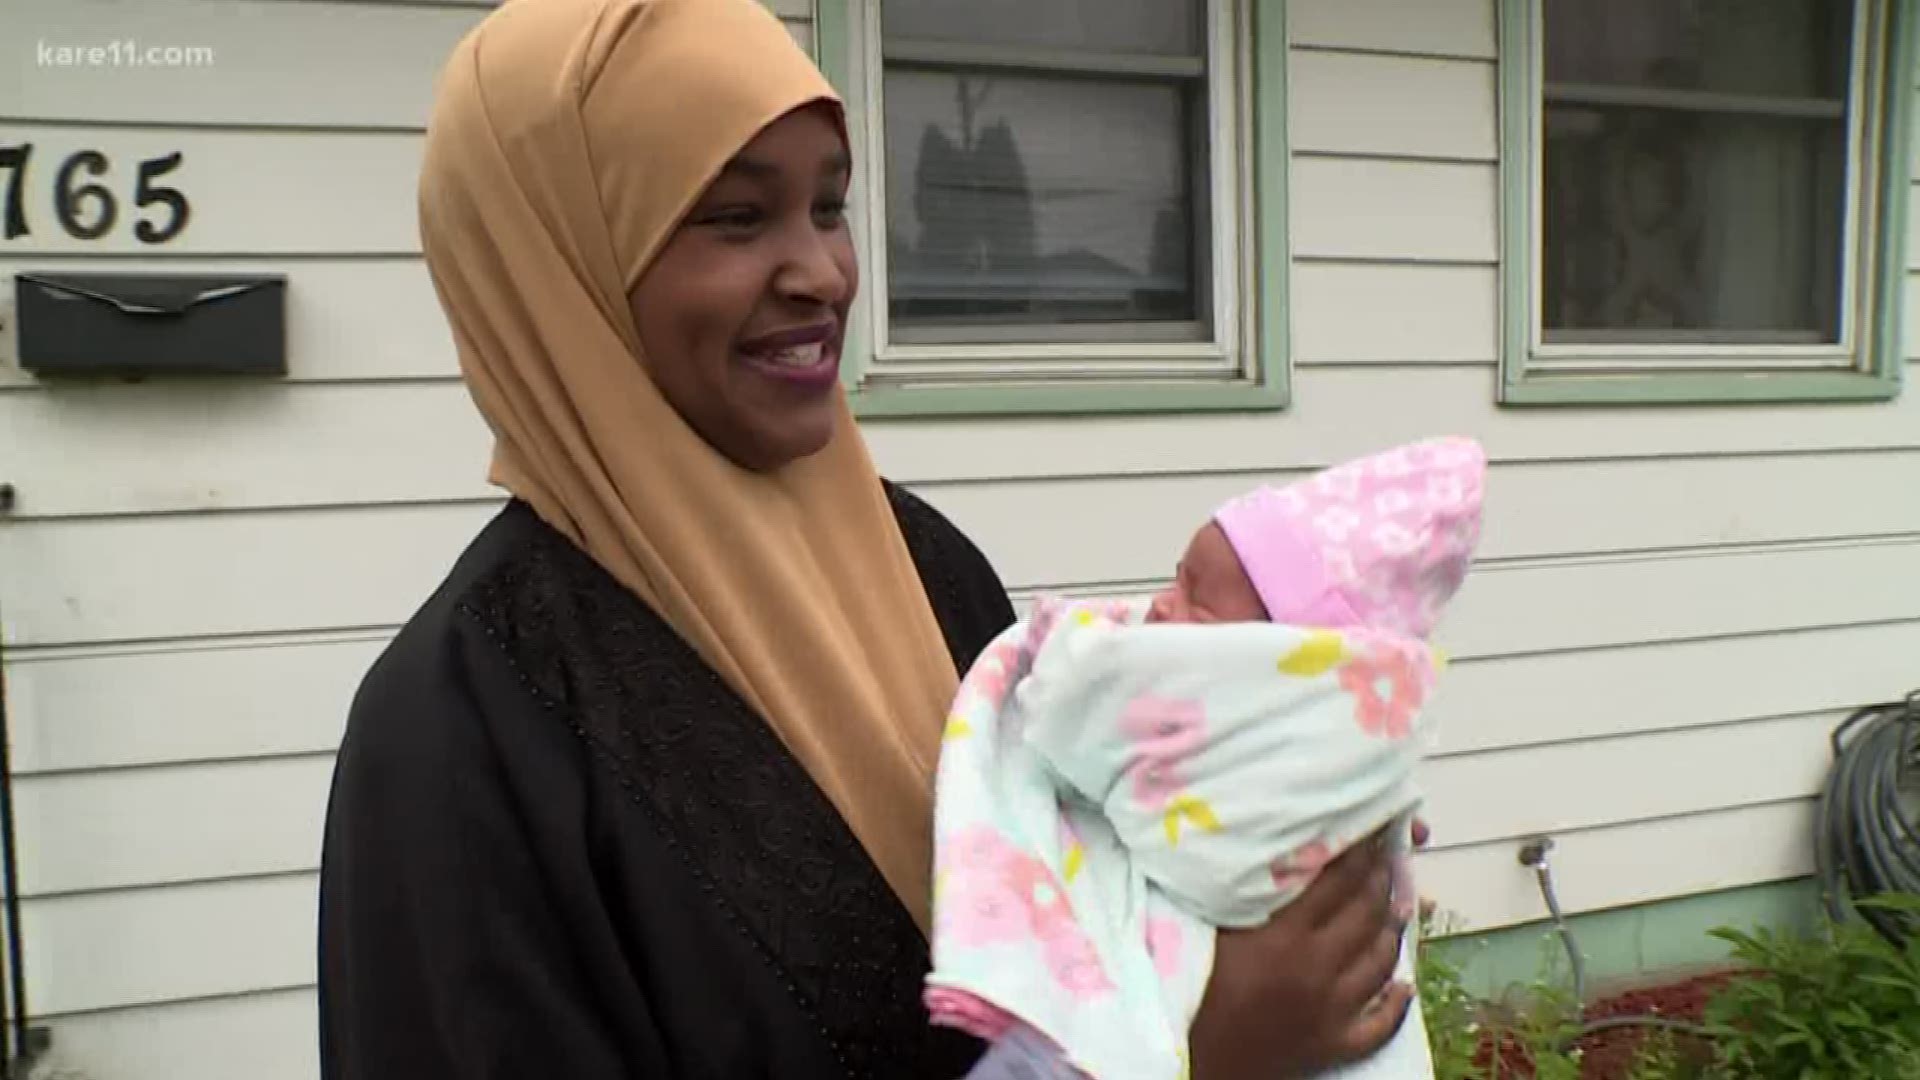 "I had my baby last night," she said after walking across the stage. "I'm so happy." https://kare11.tv/2rYeAgp